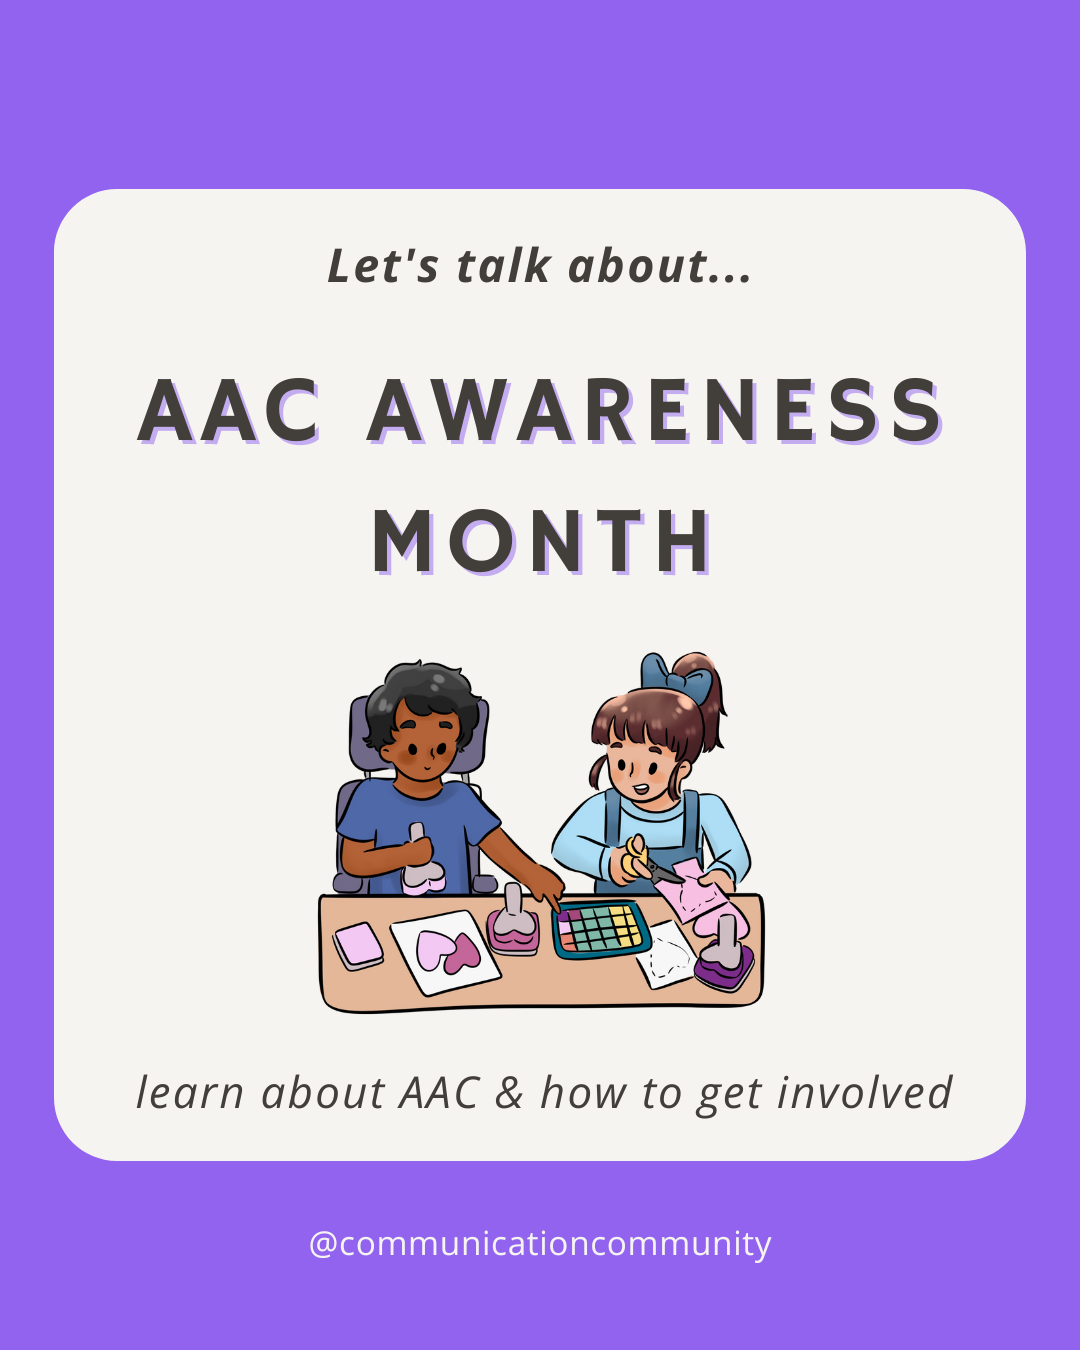 October is AAC Awareness Month: Information About AAC & How to Get Involved